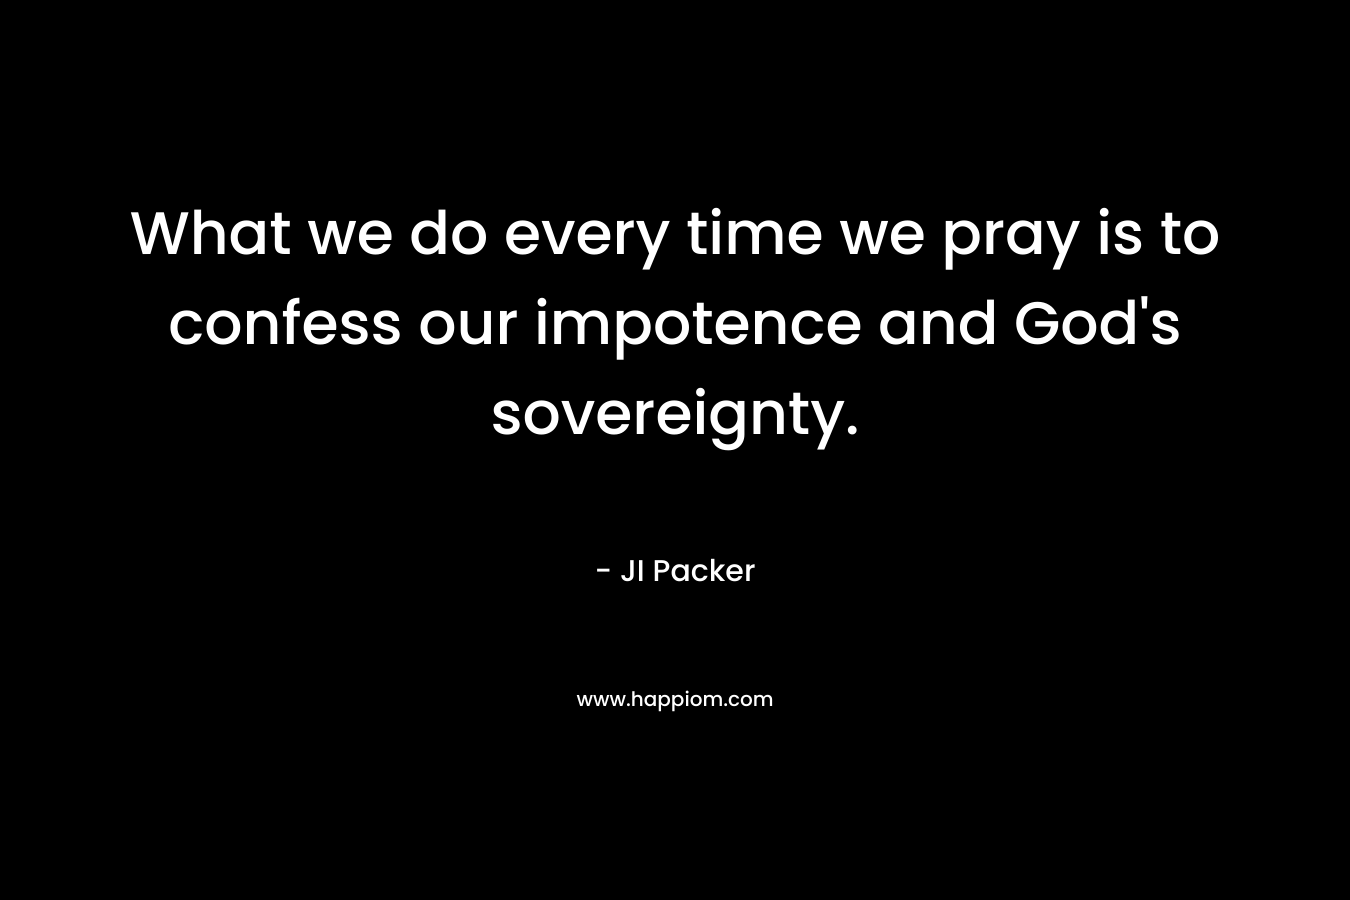 What we do every time we pray is to confess our impotence and God’s sovereignty. – JI Packer